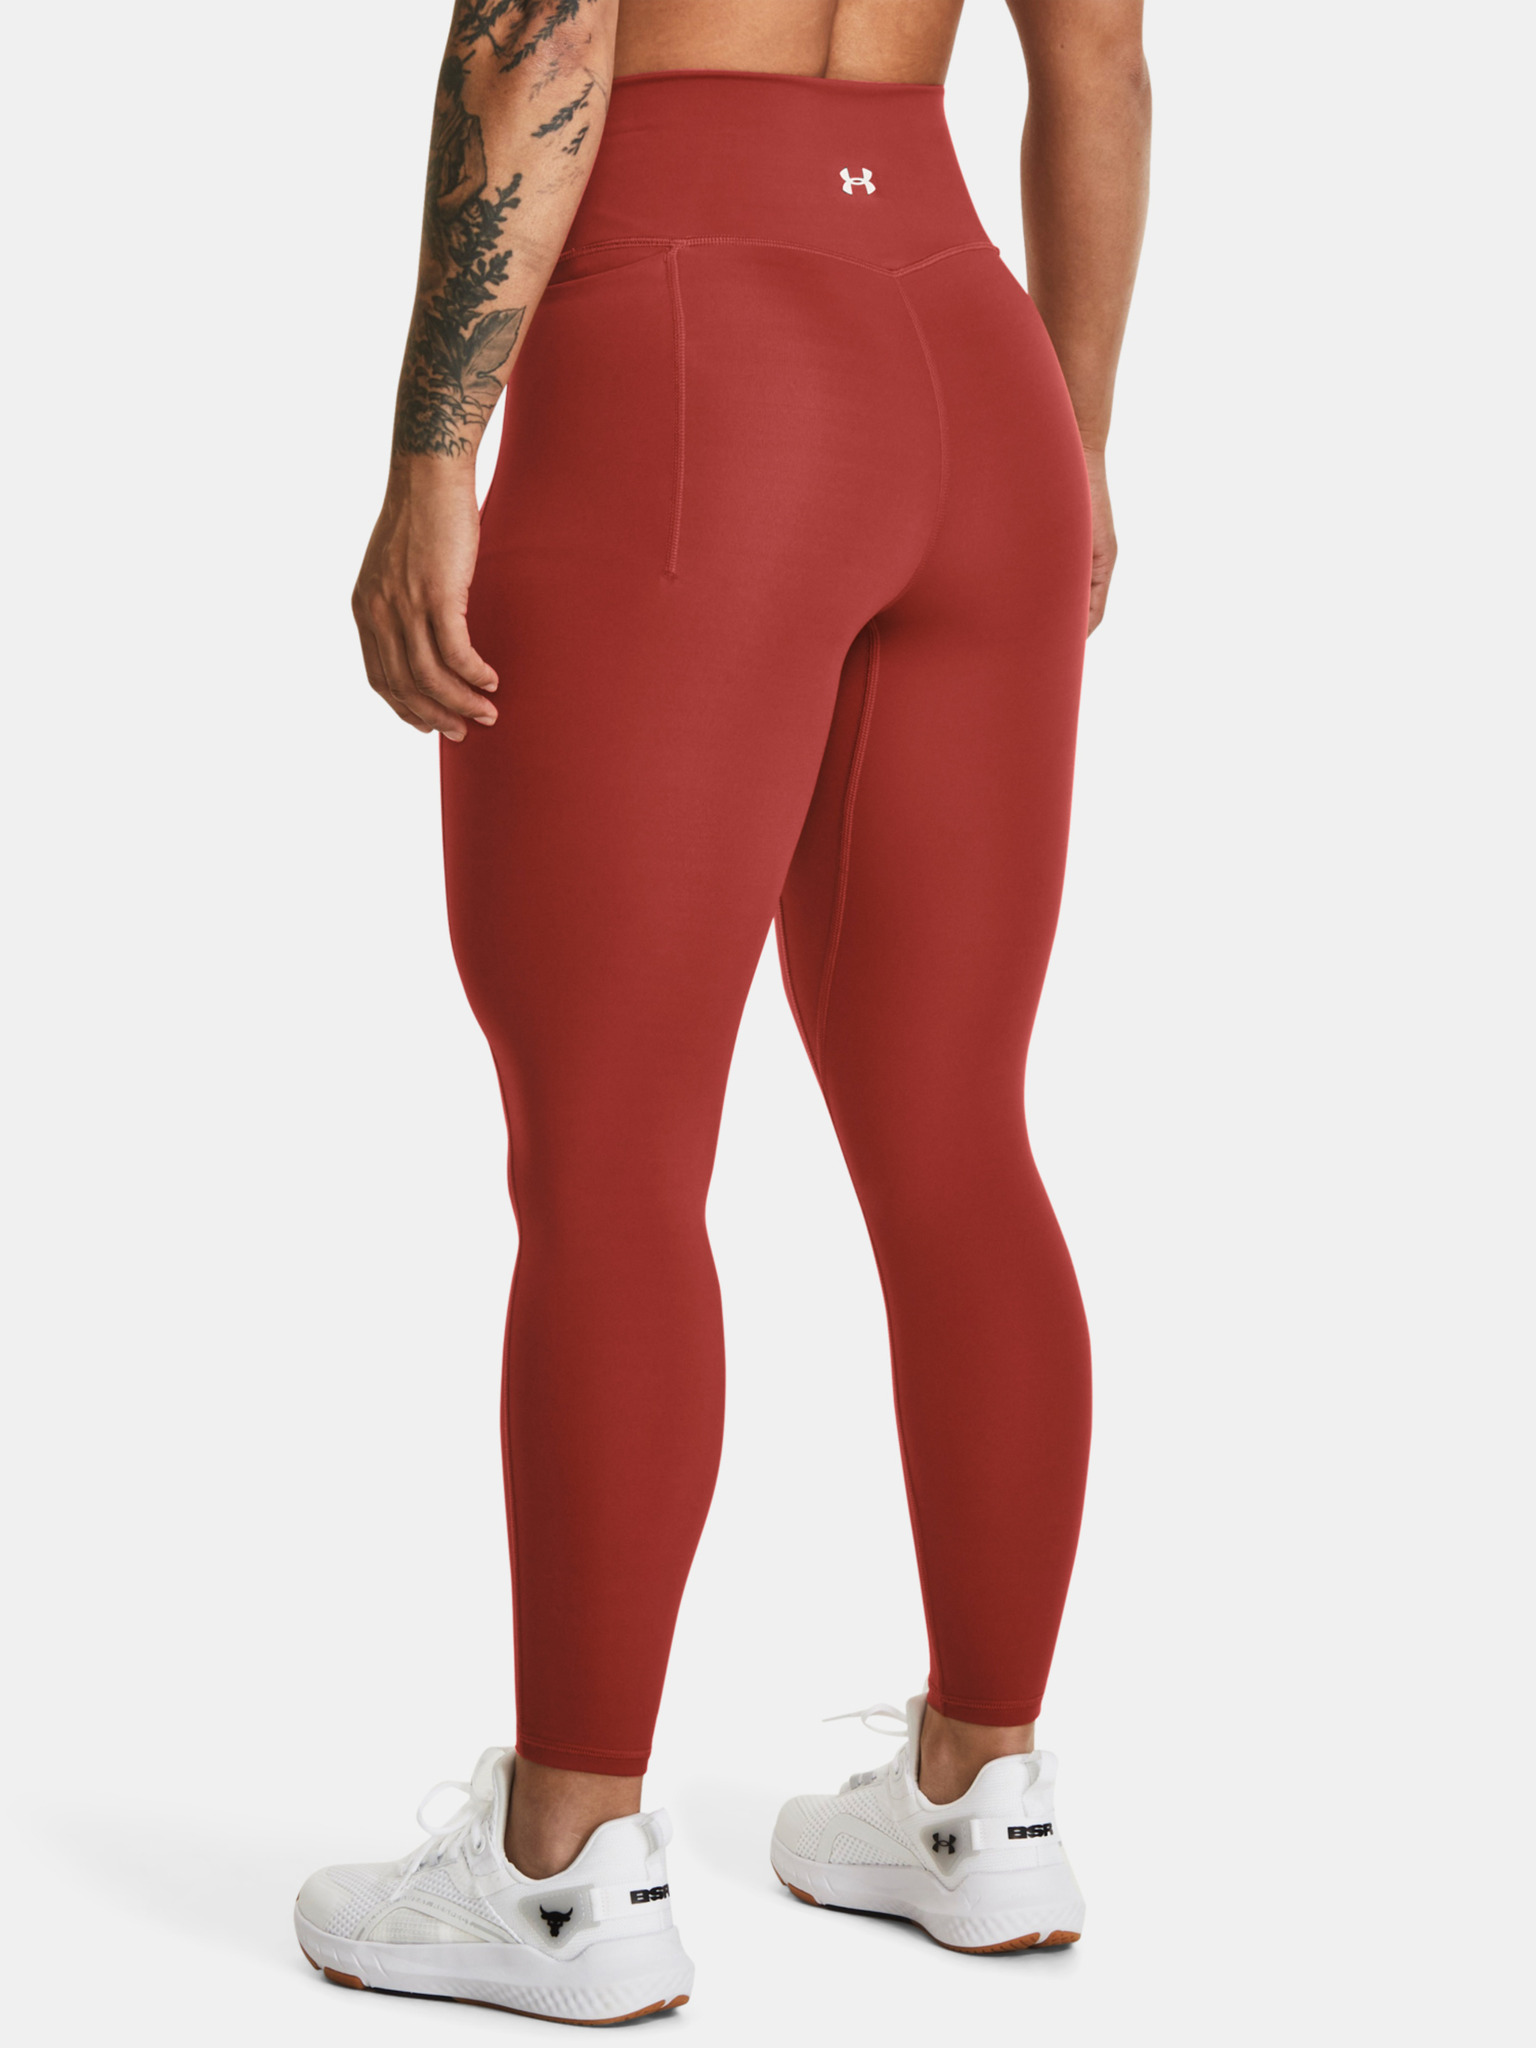 Under Armour Coral Crop Leggings NWT (Retail $60; Size XS) – Well